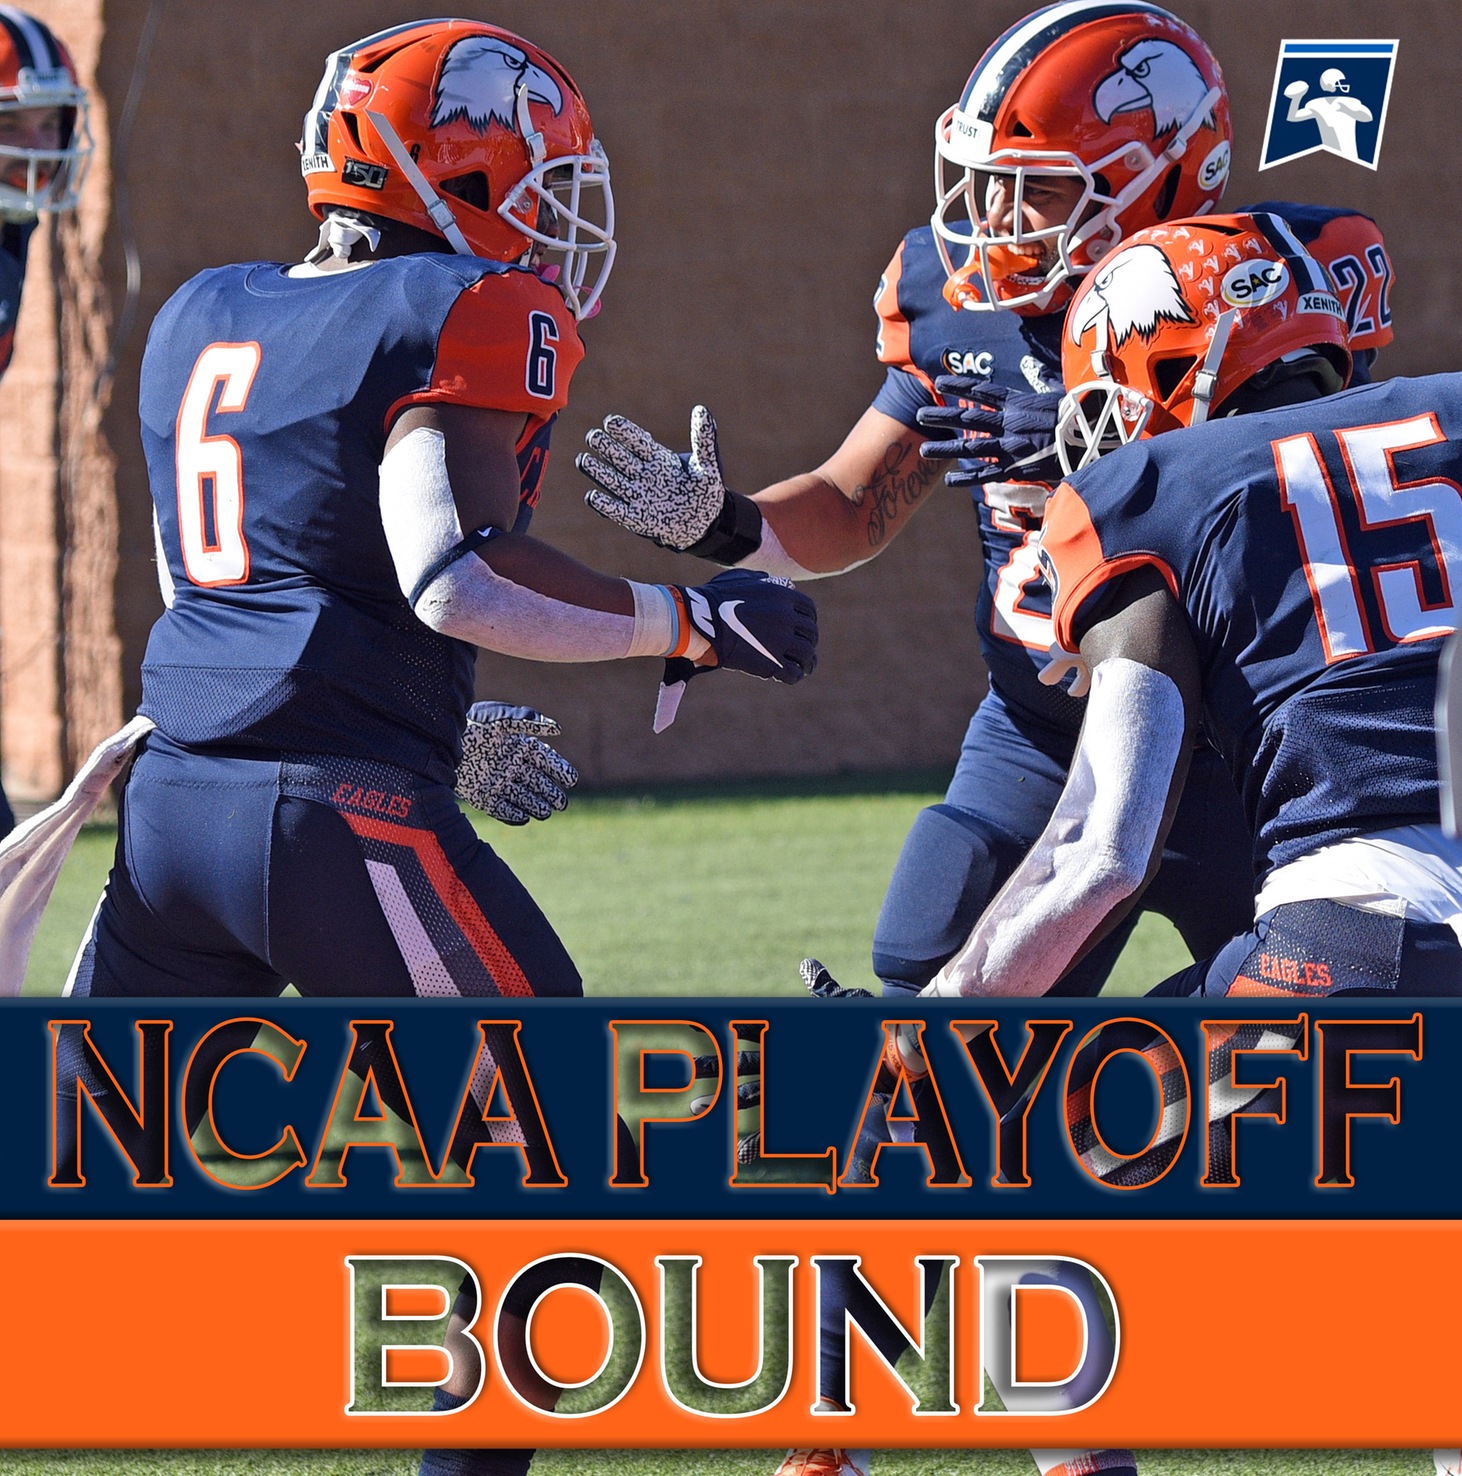 PLAYOFF BOUND! Eagles headed to Bowie State for opening round